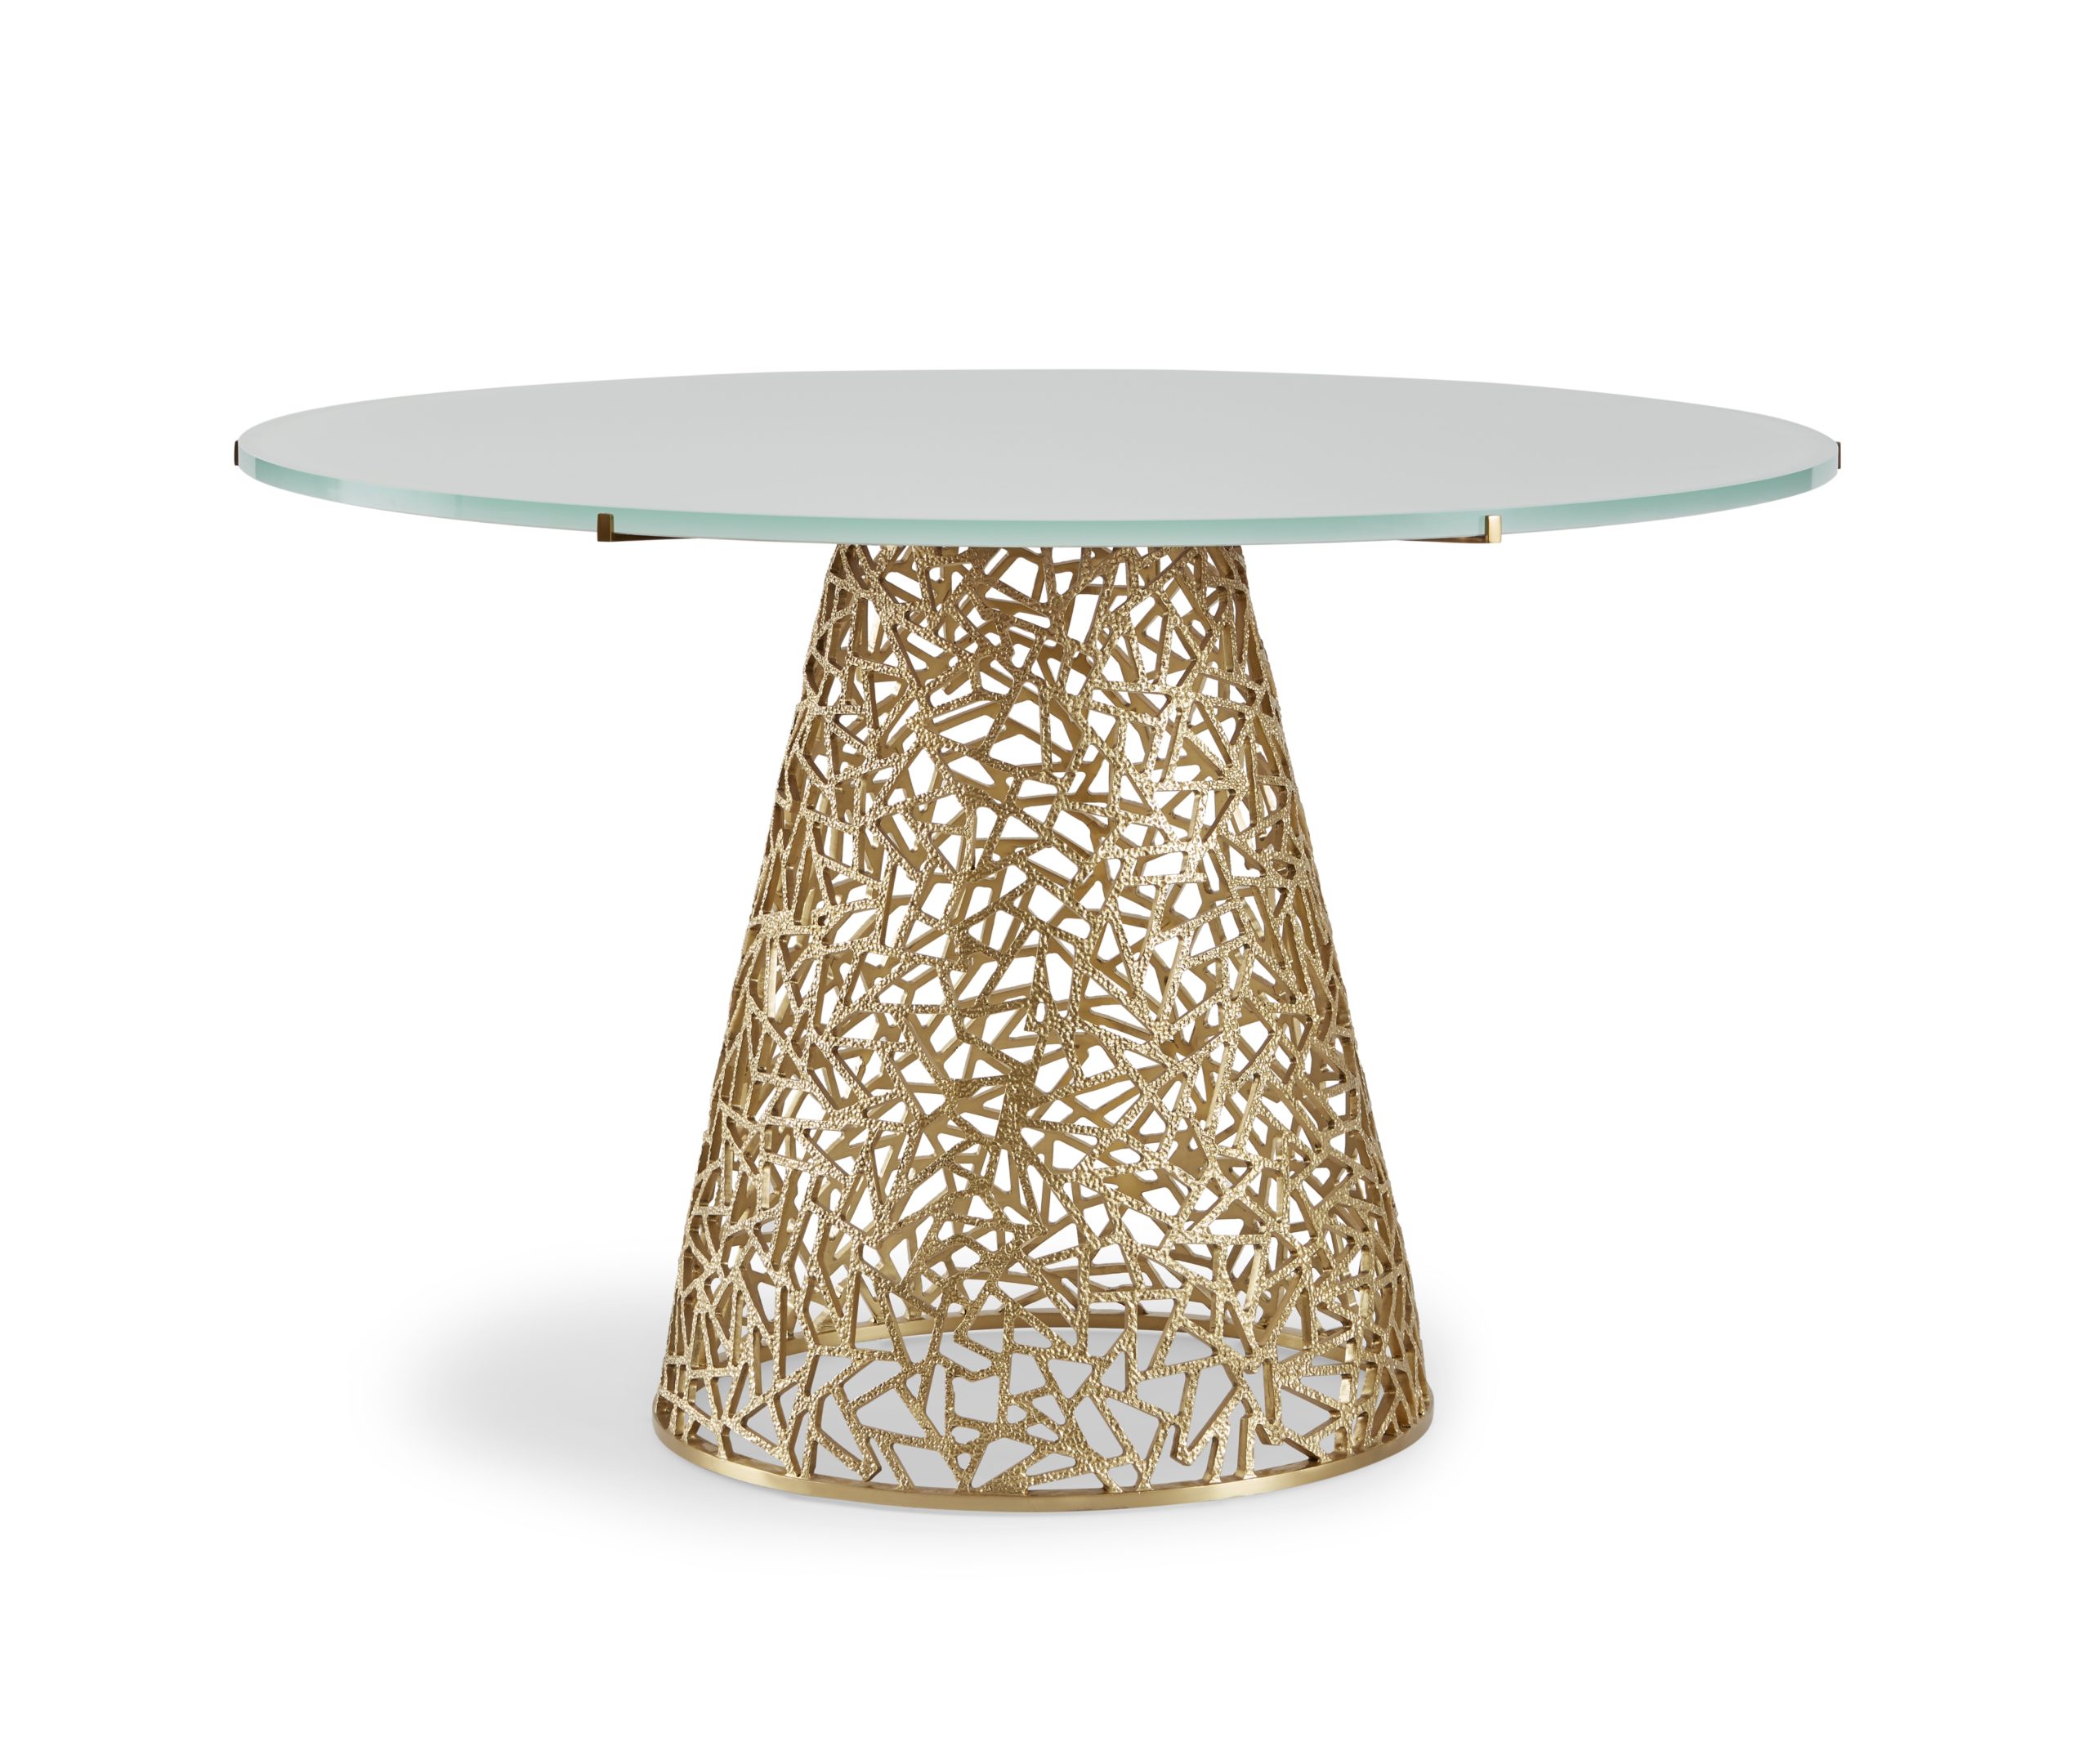 Baker_products_WNWN_filigree_table_BAA3236_FRONT-scaled-6